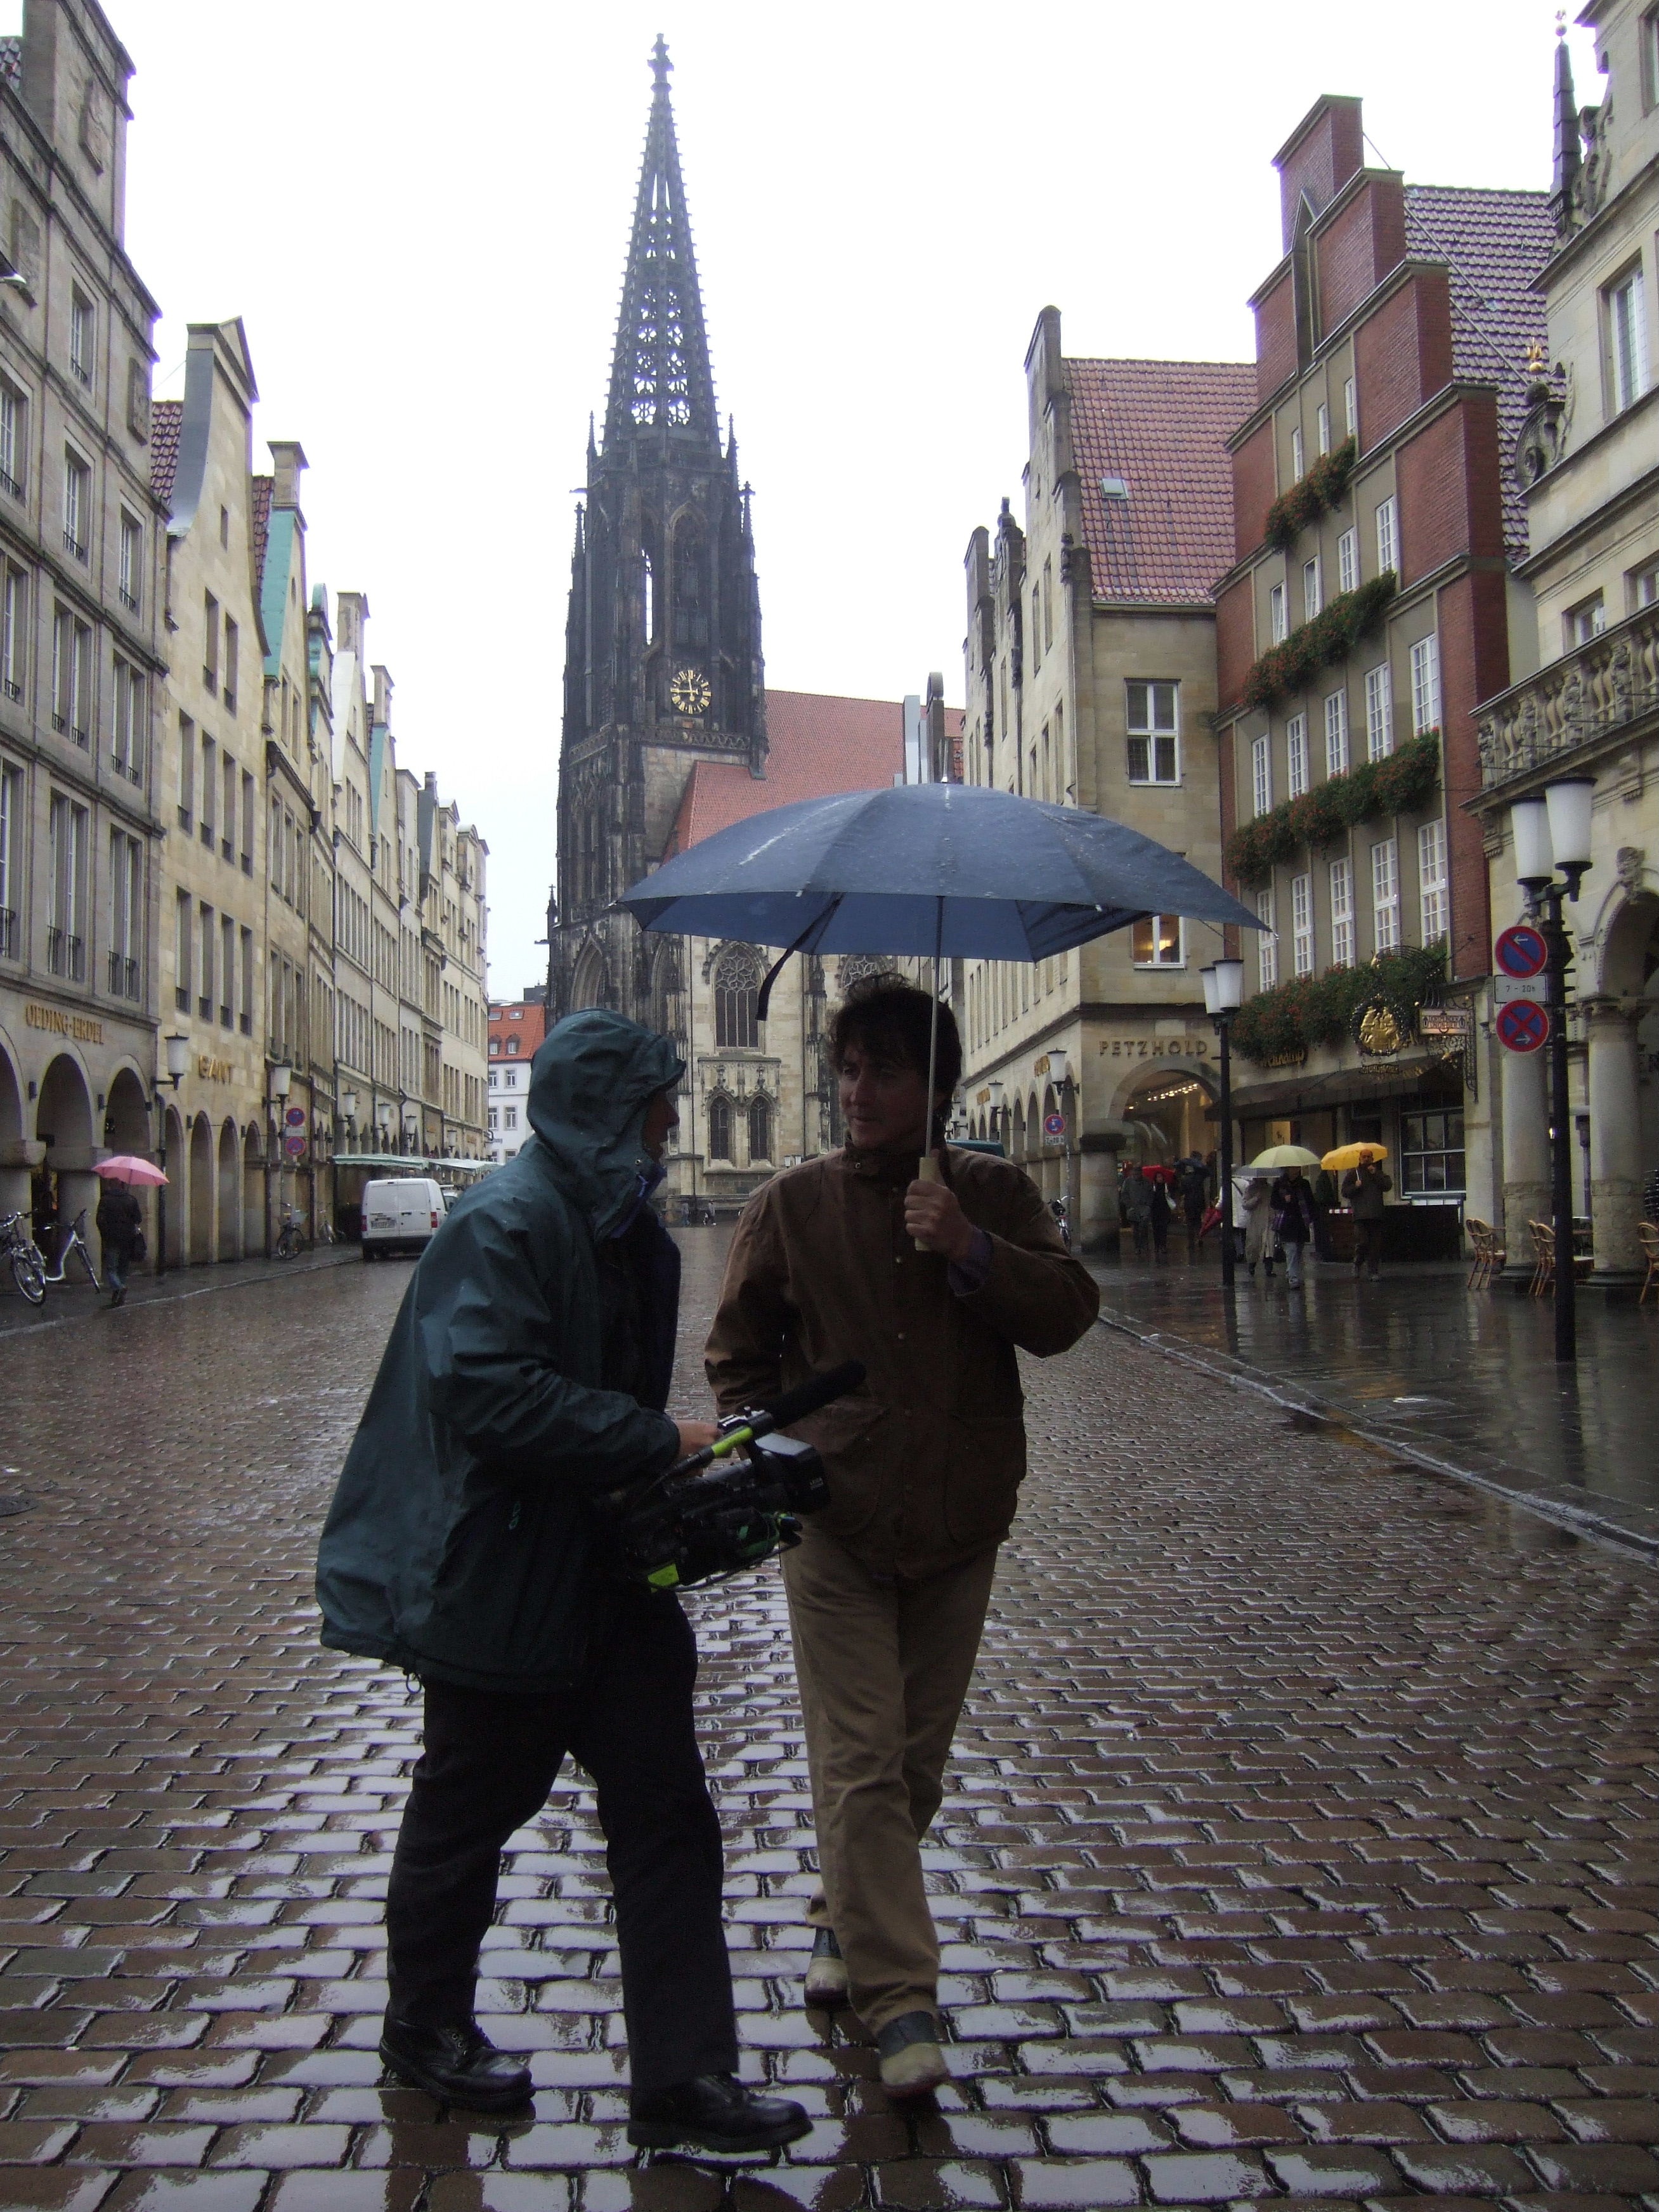 Talking about the next shot with DP Nick Higgins in Muenster, Germany, for Following The Ninth